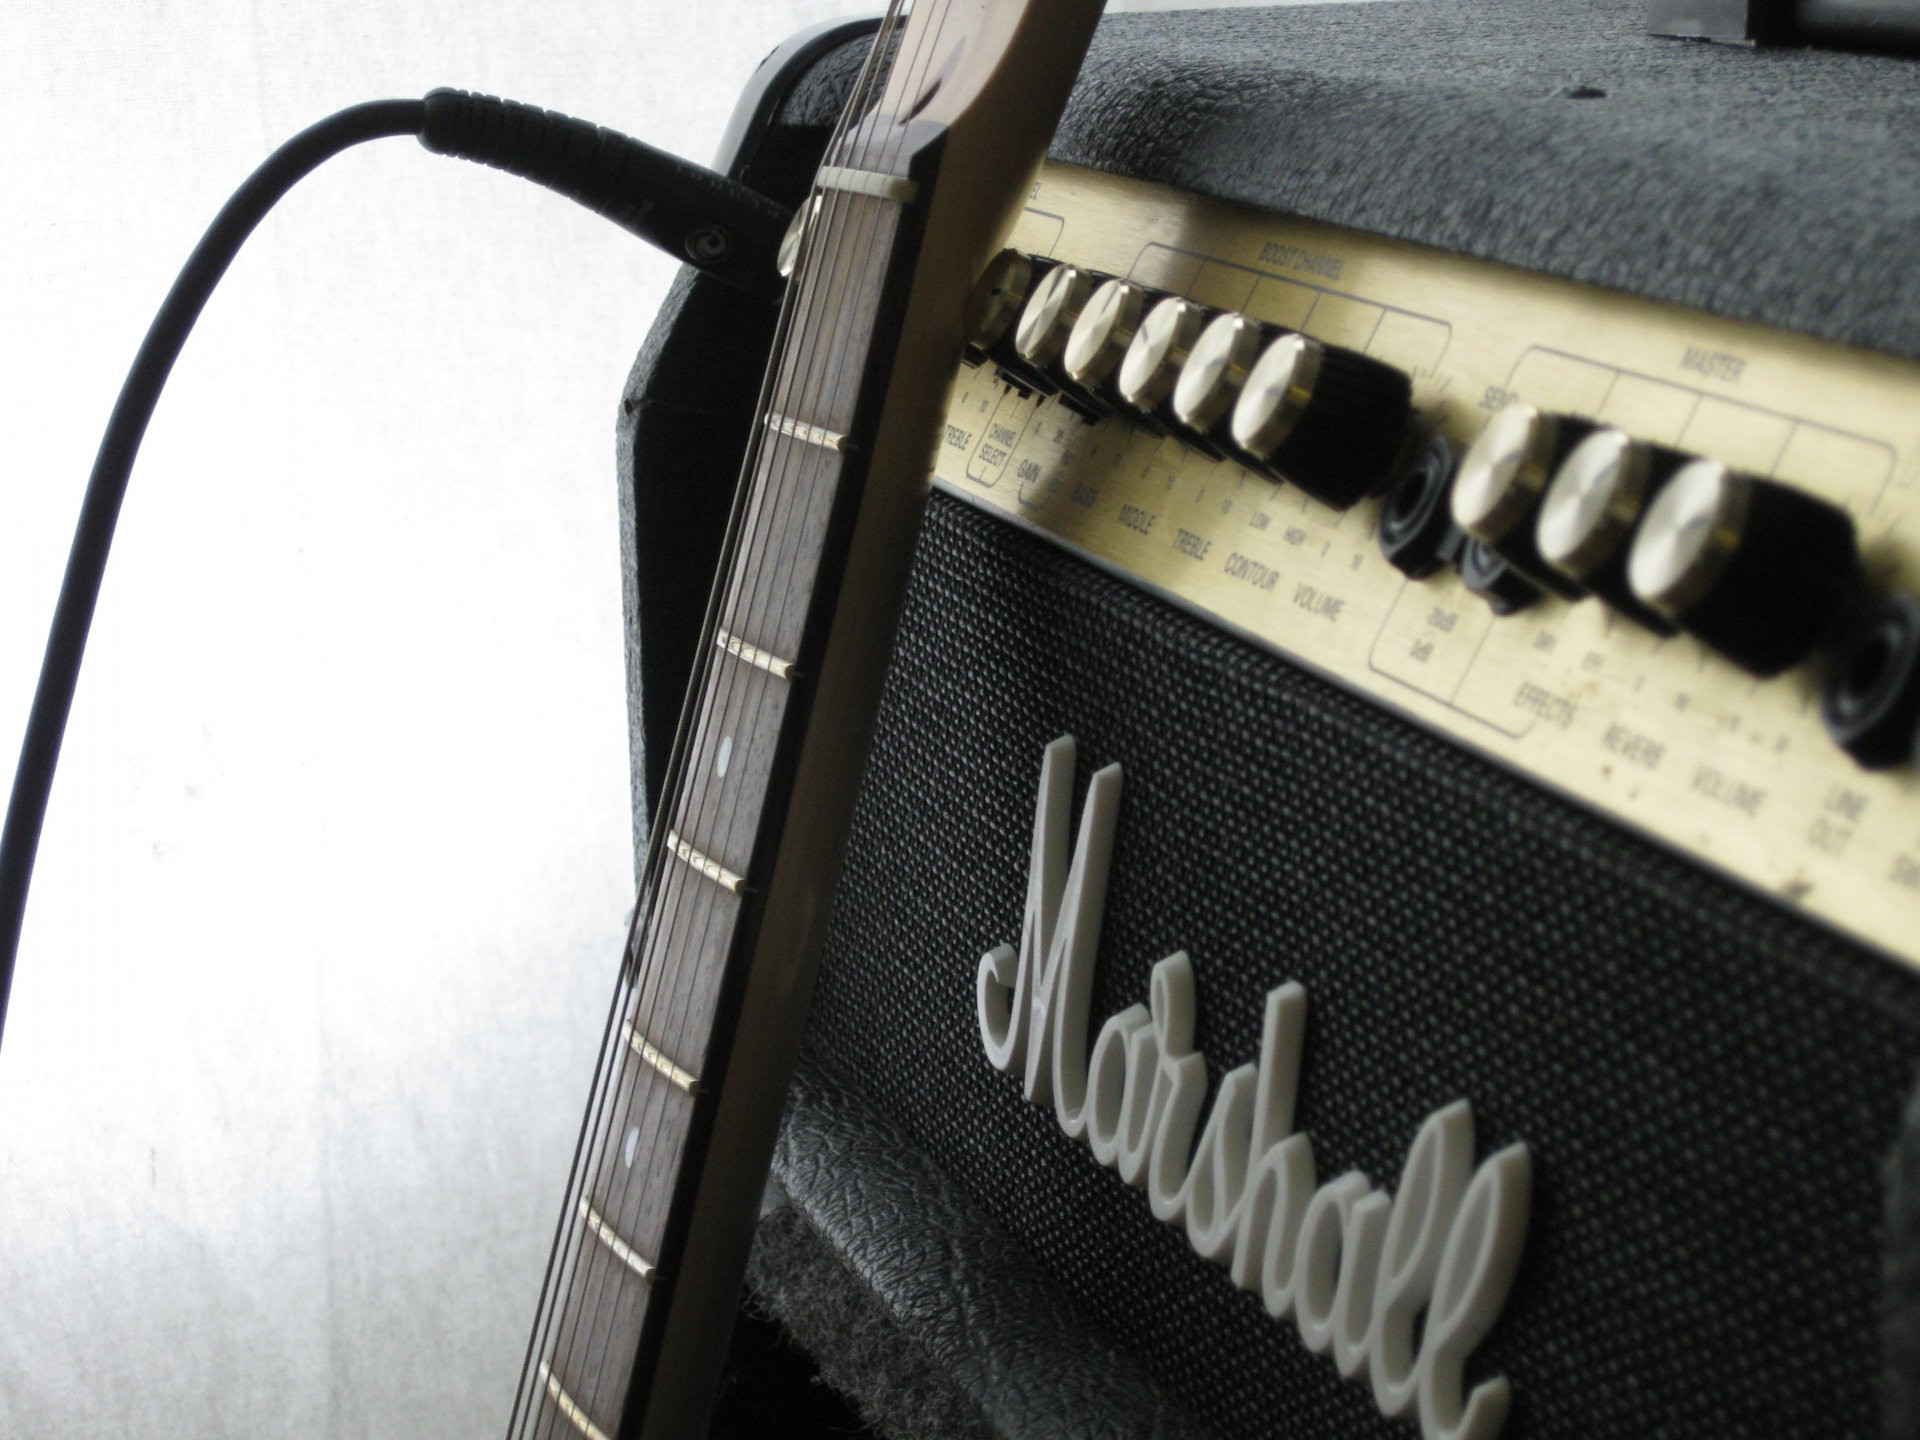 1920x1440 Wall Of Amps Wallpaper Fresh Guitars Amplifiers Close Up Photo Marshall Hd  Wallpaper